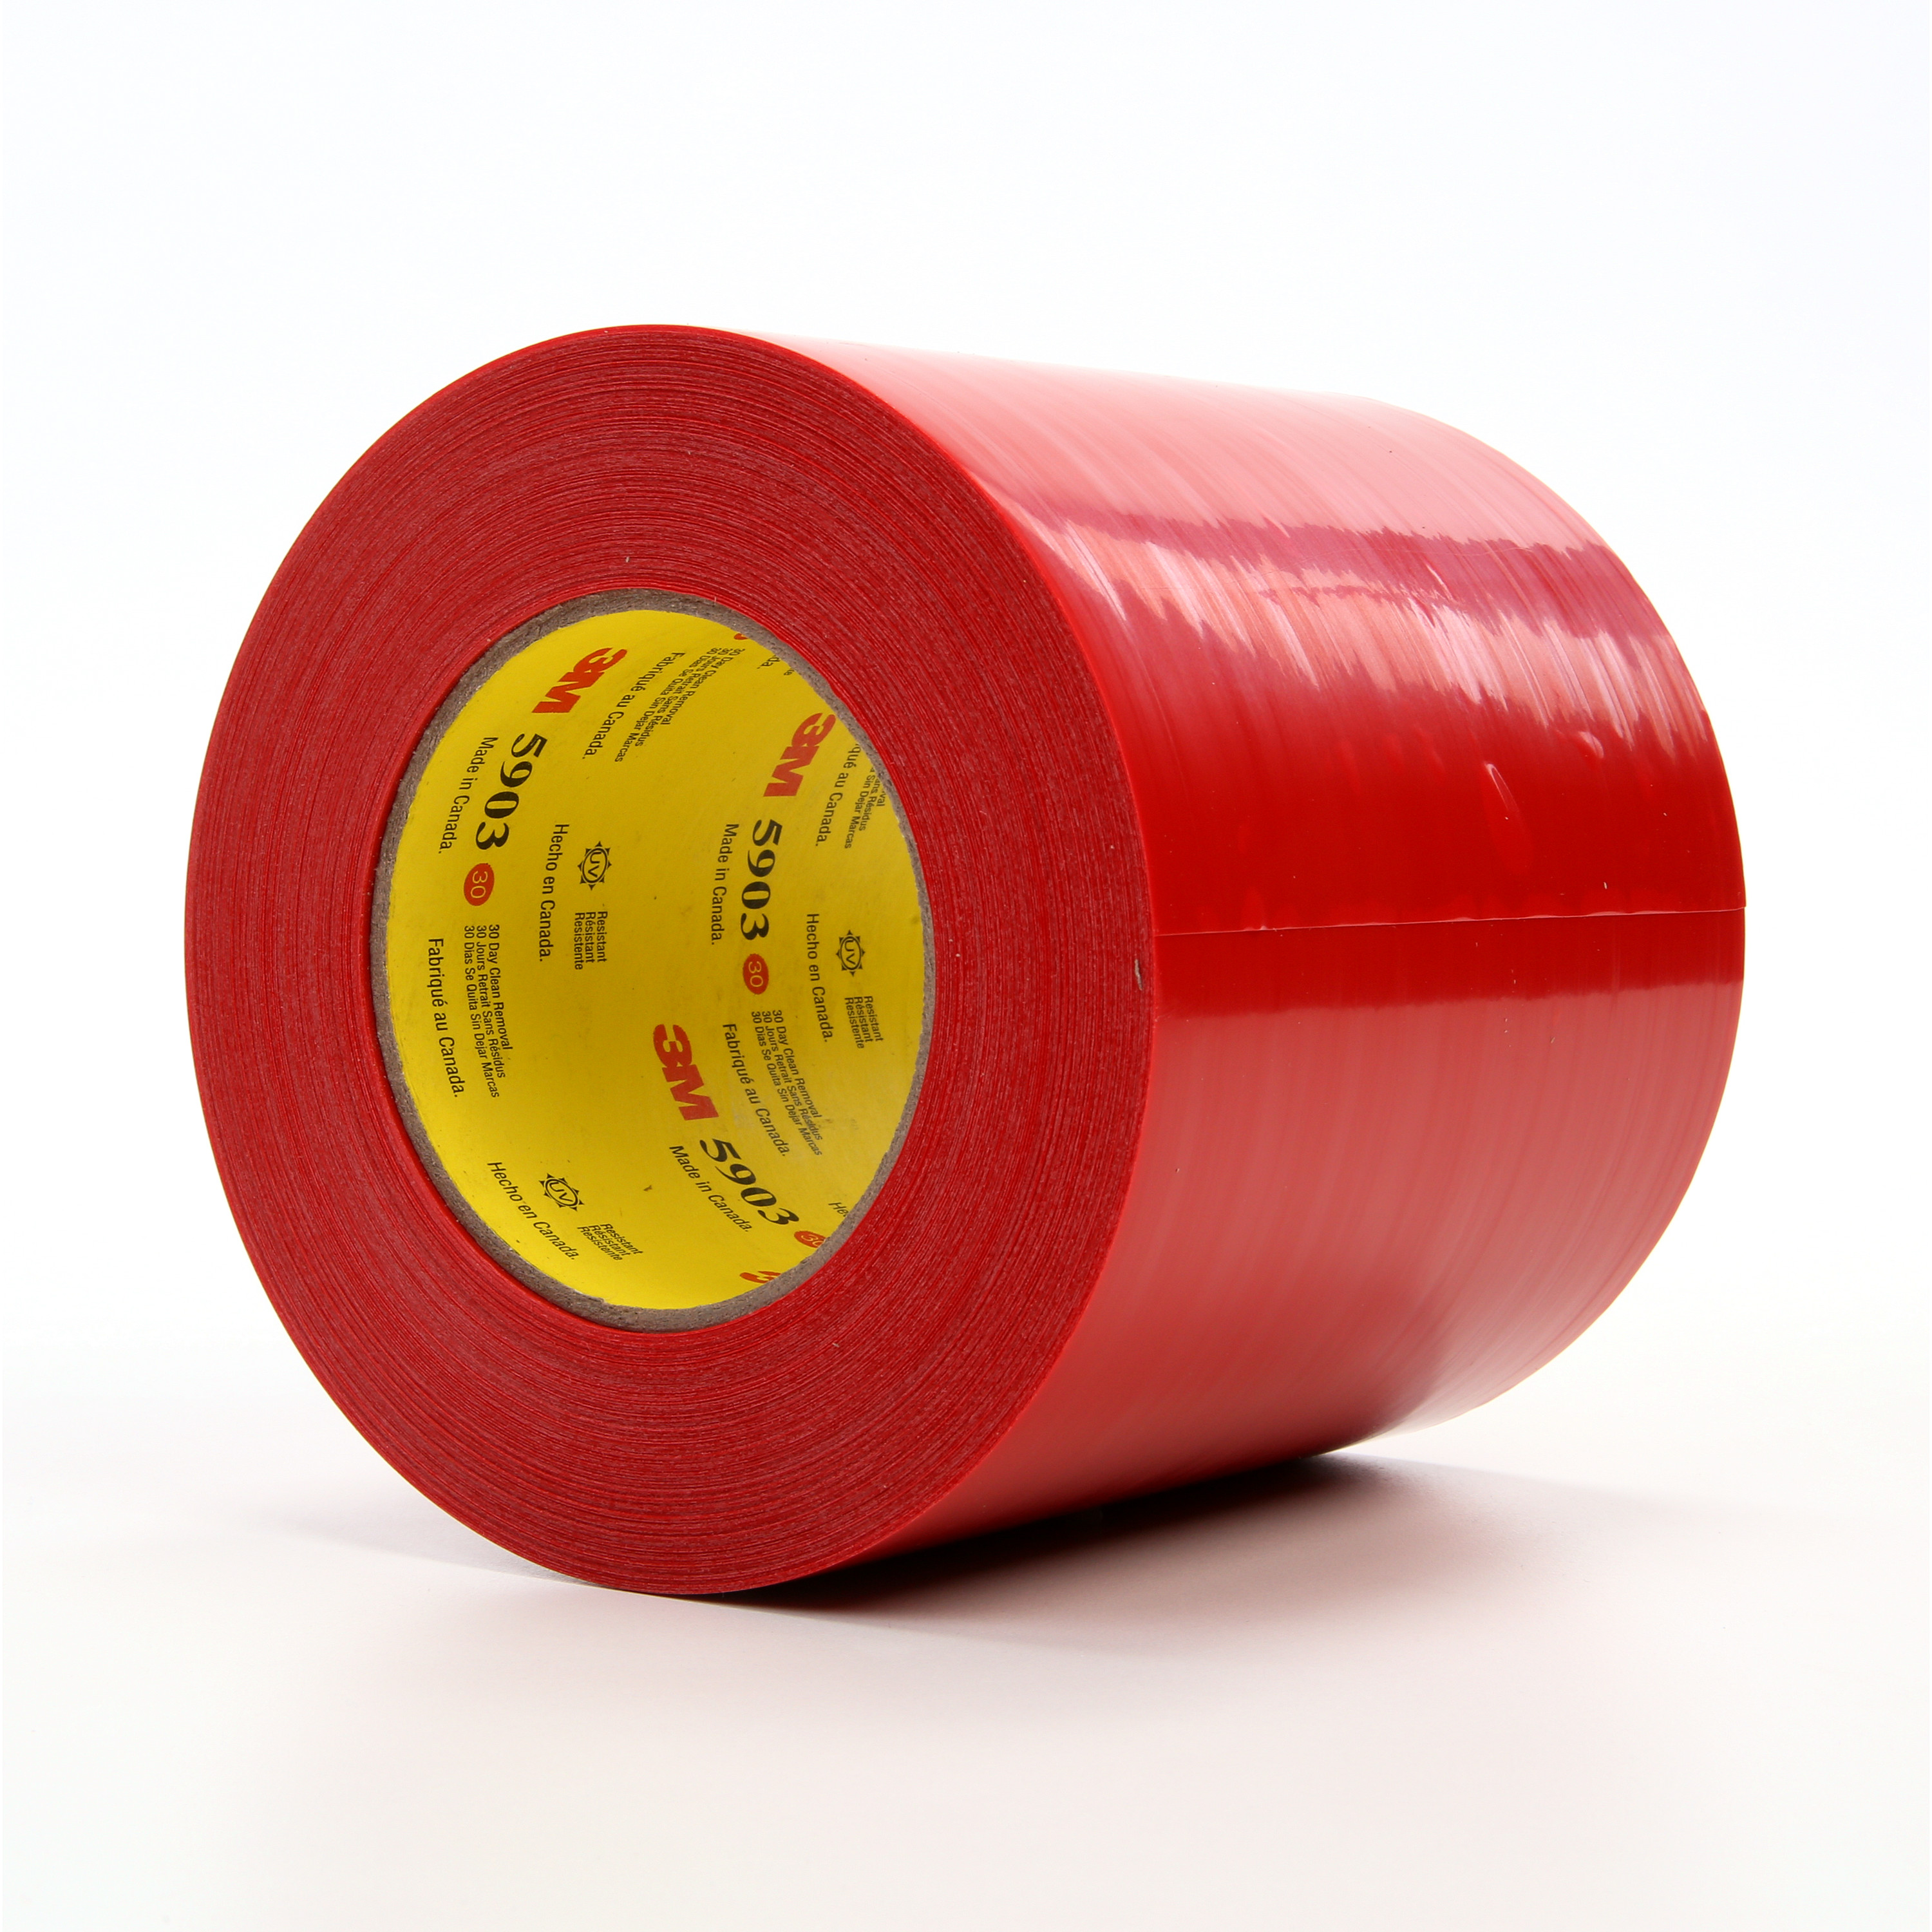 3M™ Outdoor Masking Poly Tape 5903, Red, 5 in x 60 yd, 7.5 mil, 8 per
case